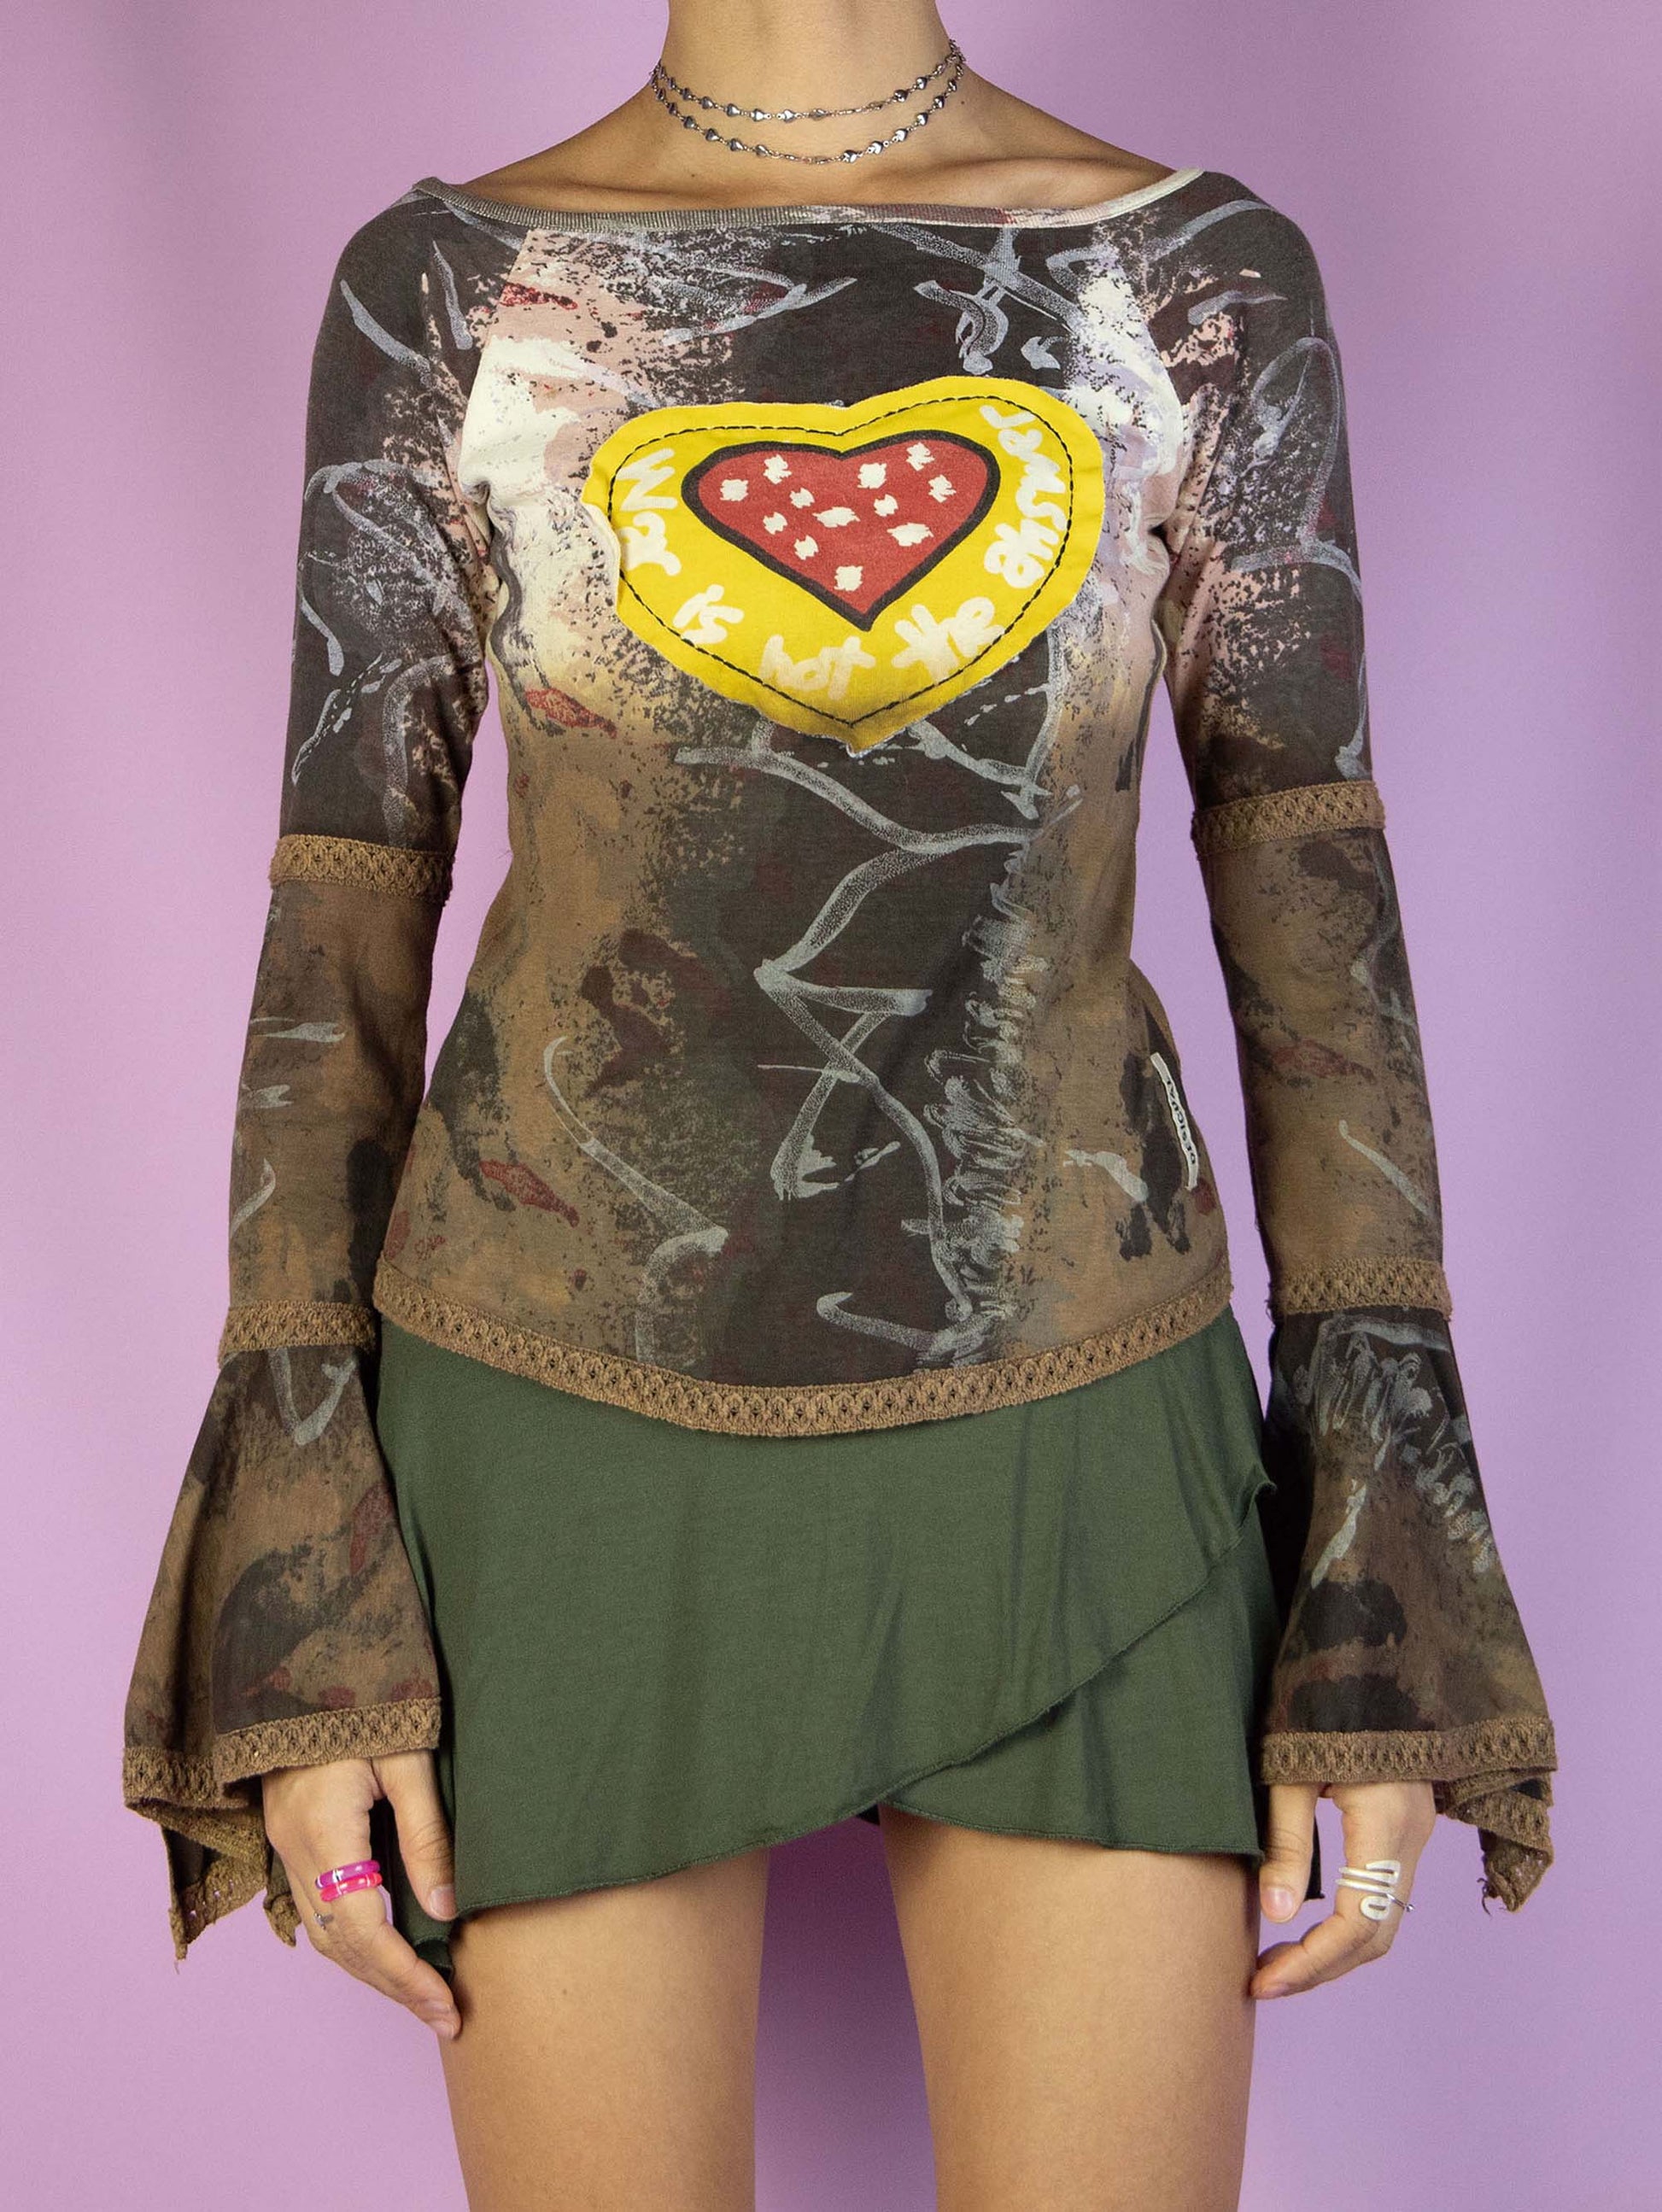 The Y2K Desigual Brown Bell Sleeve Top is a multicolored graphic brown shirt with an abstract print, long bell sleeves, and a heart-shaped patchwork-style detail. Cyber avant garde 2000s subversive top.